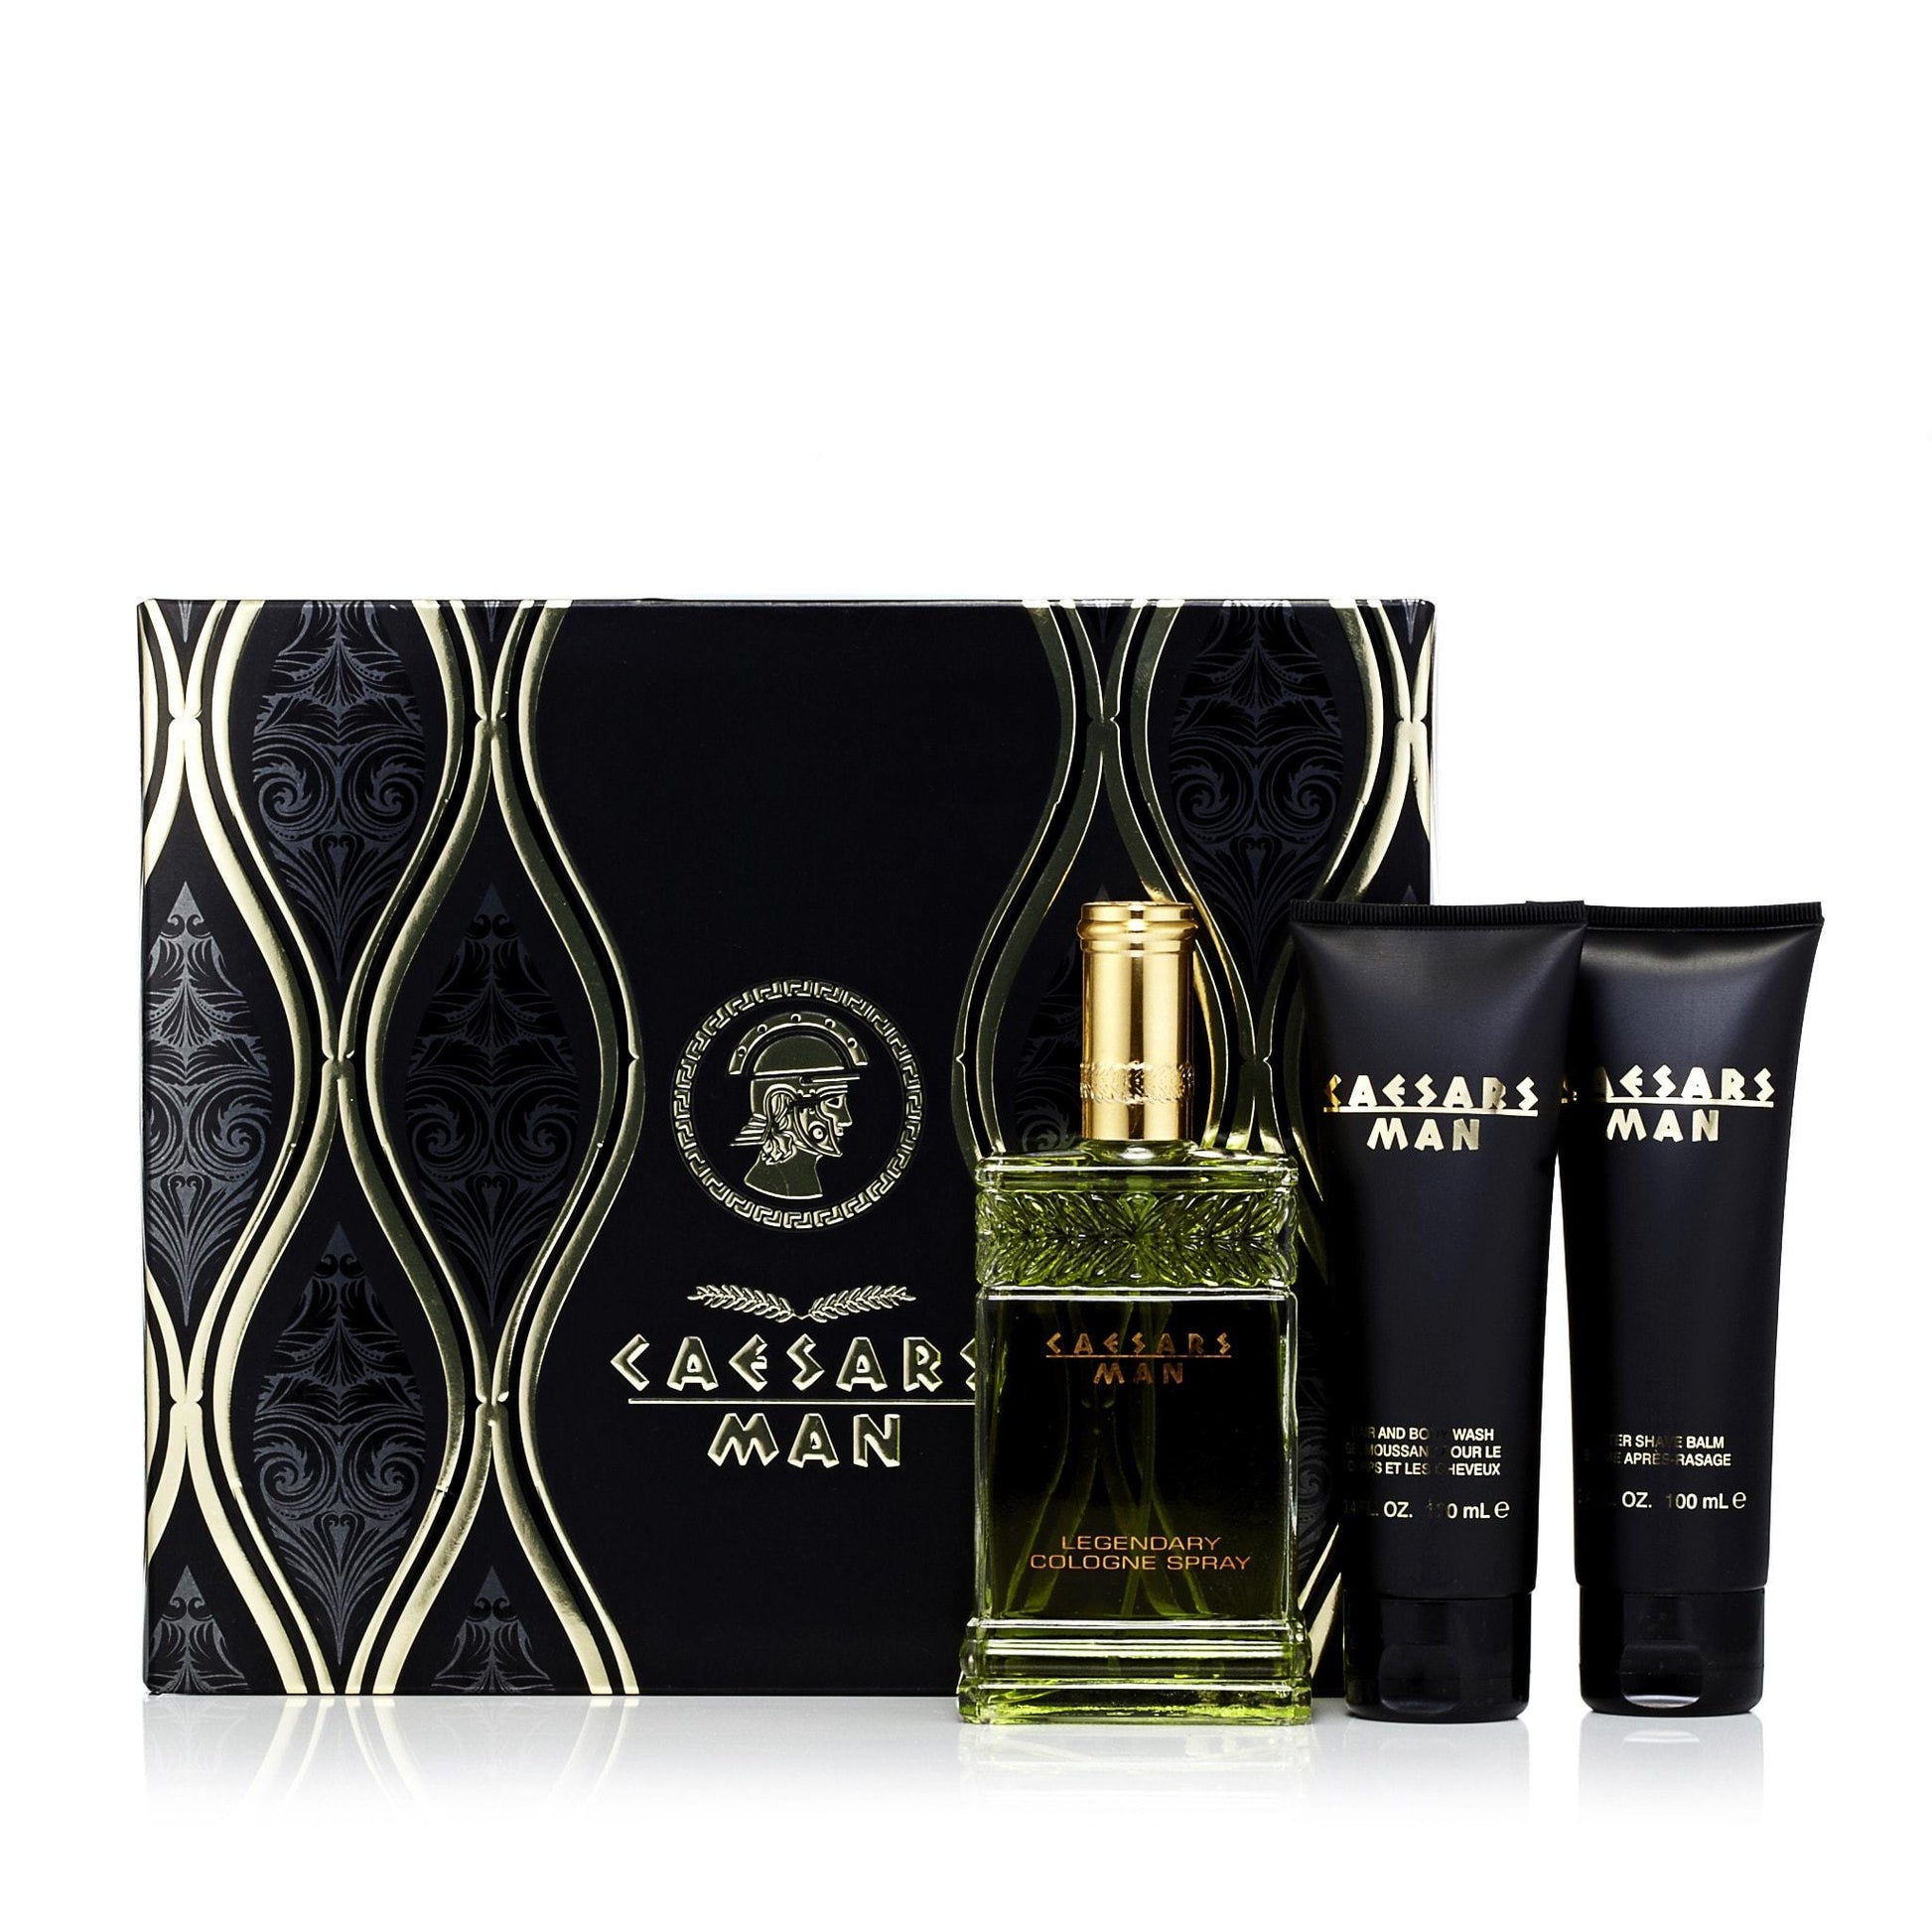 Man Set Cologne, After Shave and Body Wash for Men by Caesar's, Product image 2